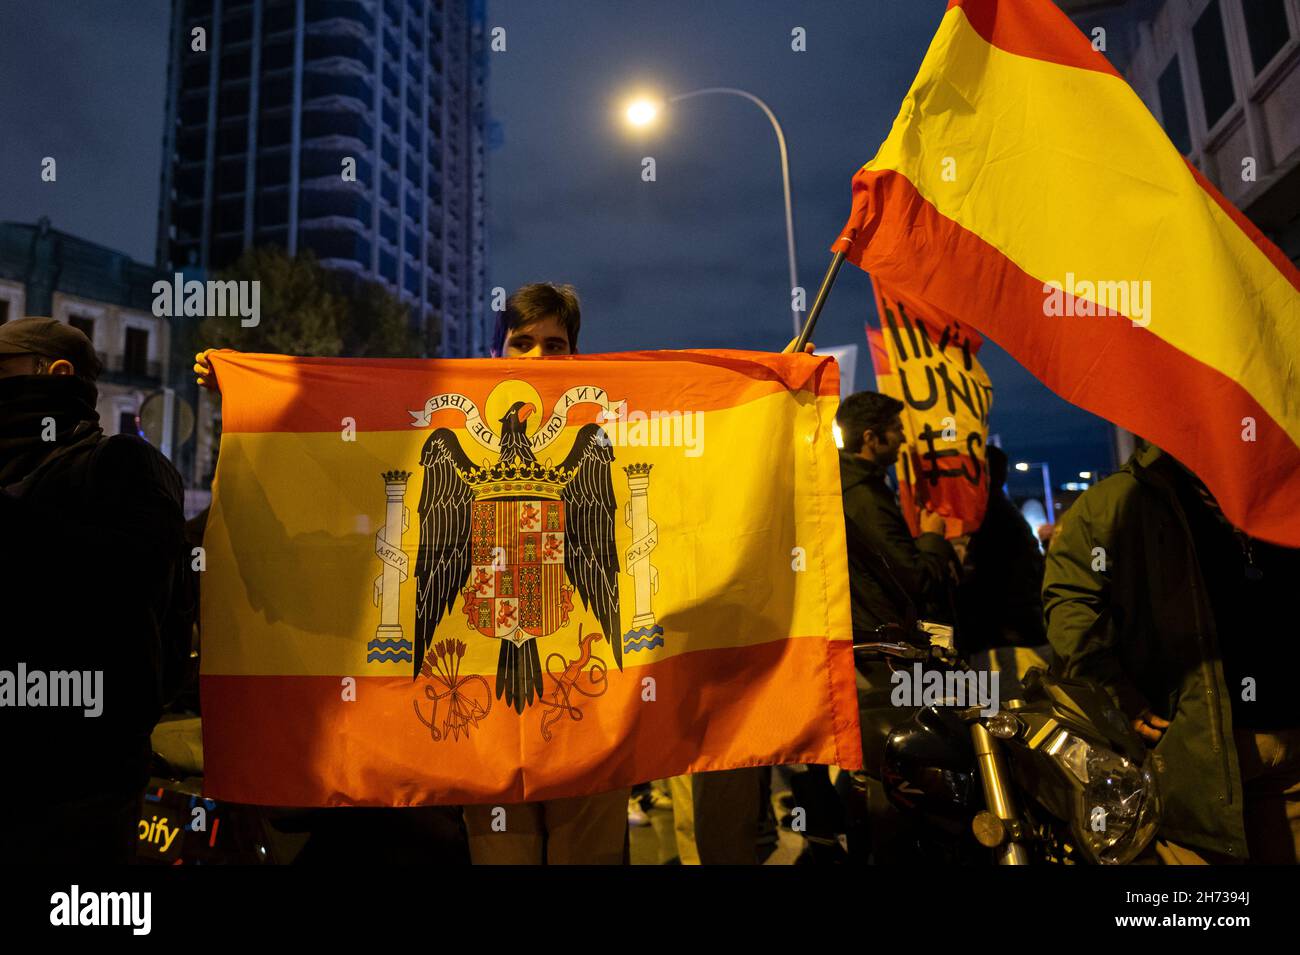 Madrid, Spain. 19th Nov, 2021. A far right wing supporter of La Falange carrying a pre-constitutional flag is seen during a demonstration for the anniversary of the death of Jose Antonio Primo de Rivera, founder of La Falange, commemorating the 85th anniversary of his death on 20 November 1936, shot at the beginning of the Spanish Civil War. Credit: Marcos del Mazo/Alamy Live News Stock Photo